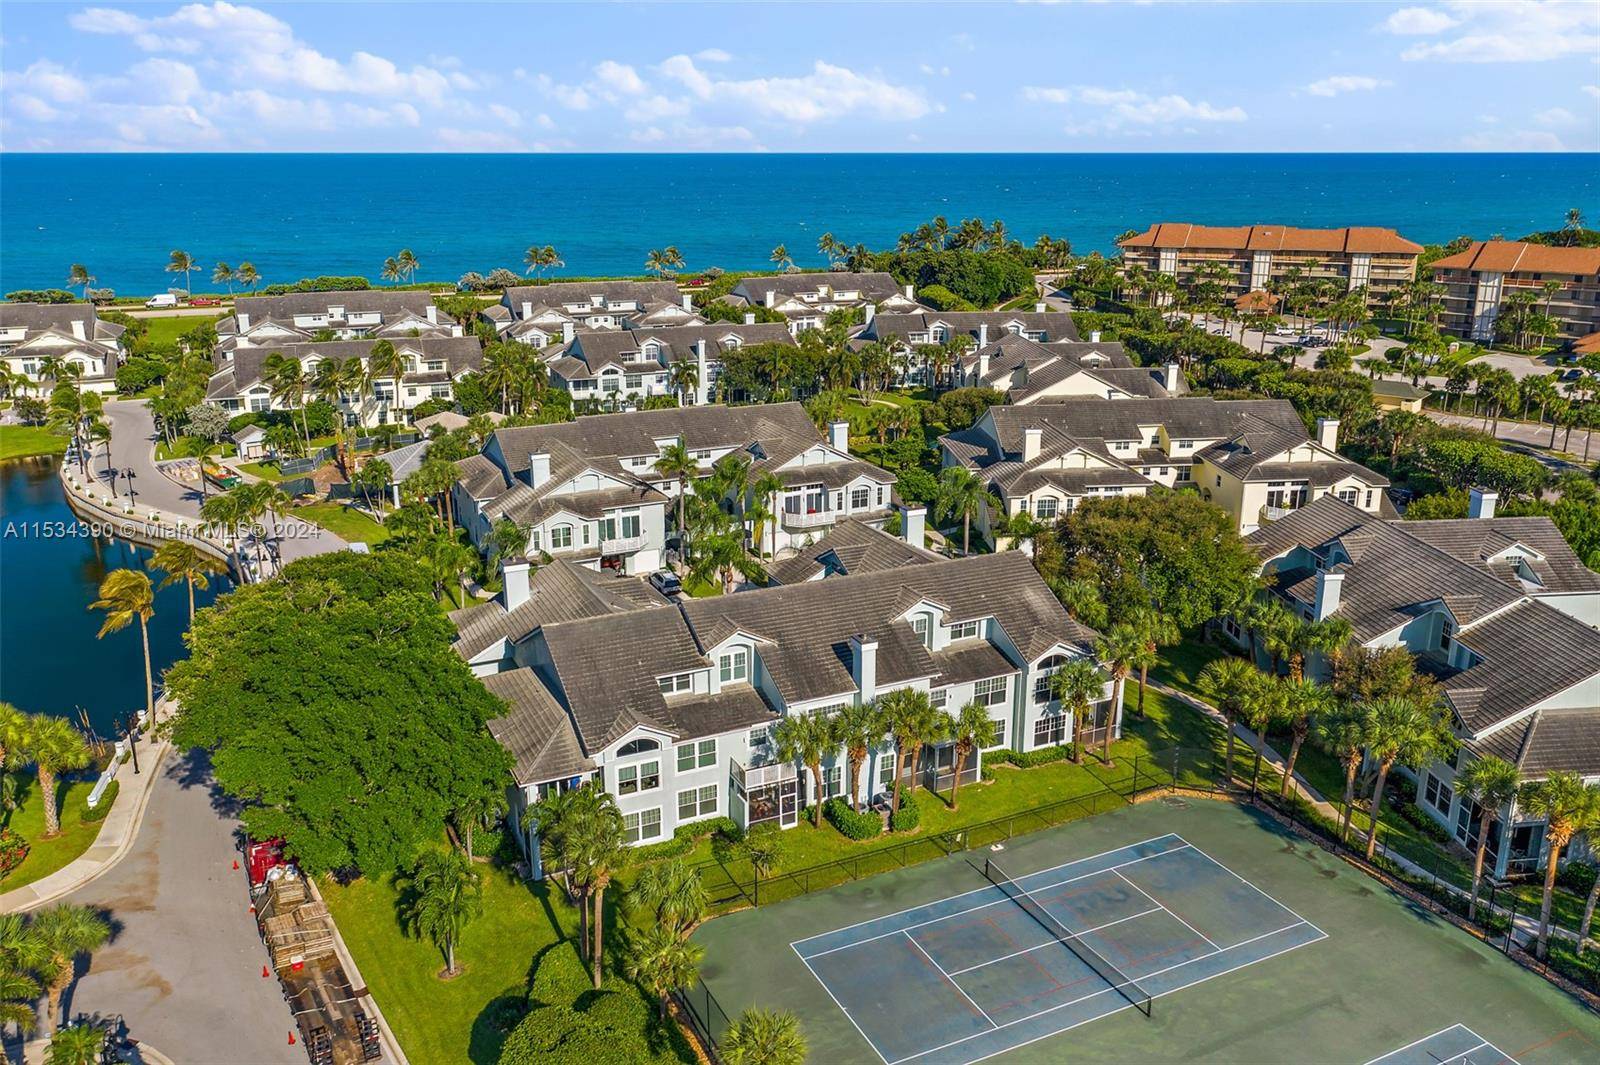 Welcome to Sea Colony, one of the most popular gated communities in Jupiter ideally located by the beach.